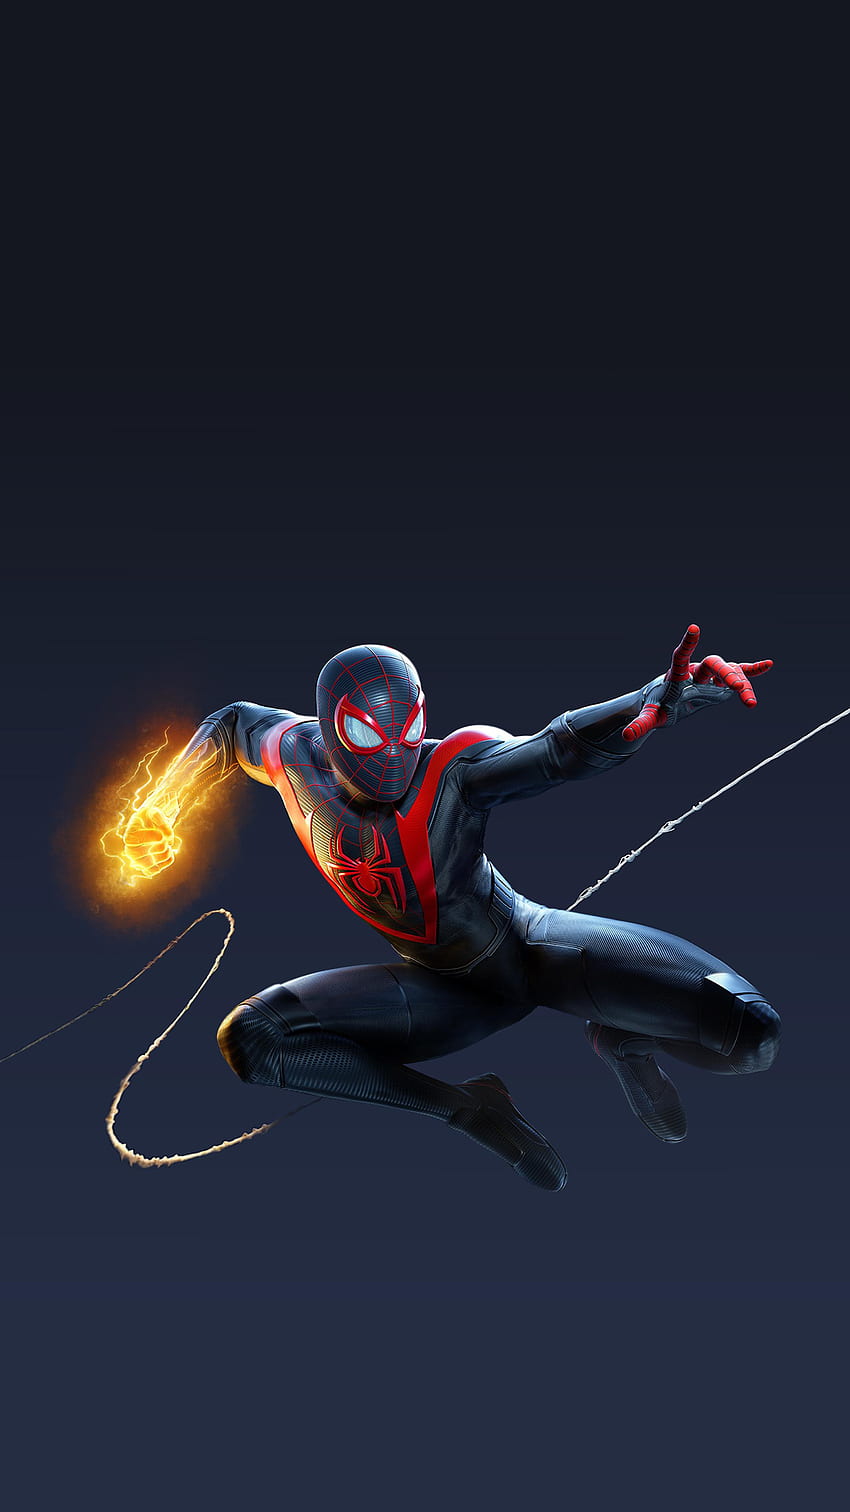 Spider Man Miles Morales. Repost With Higher Resolution. : R/ Vertical, Spider-Man Vertical HD phone wallpaper